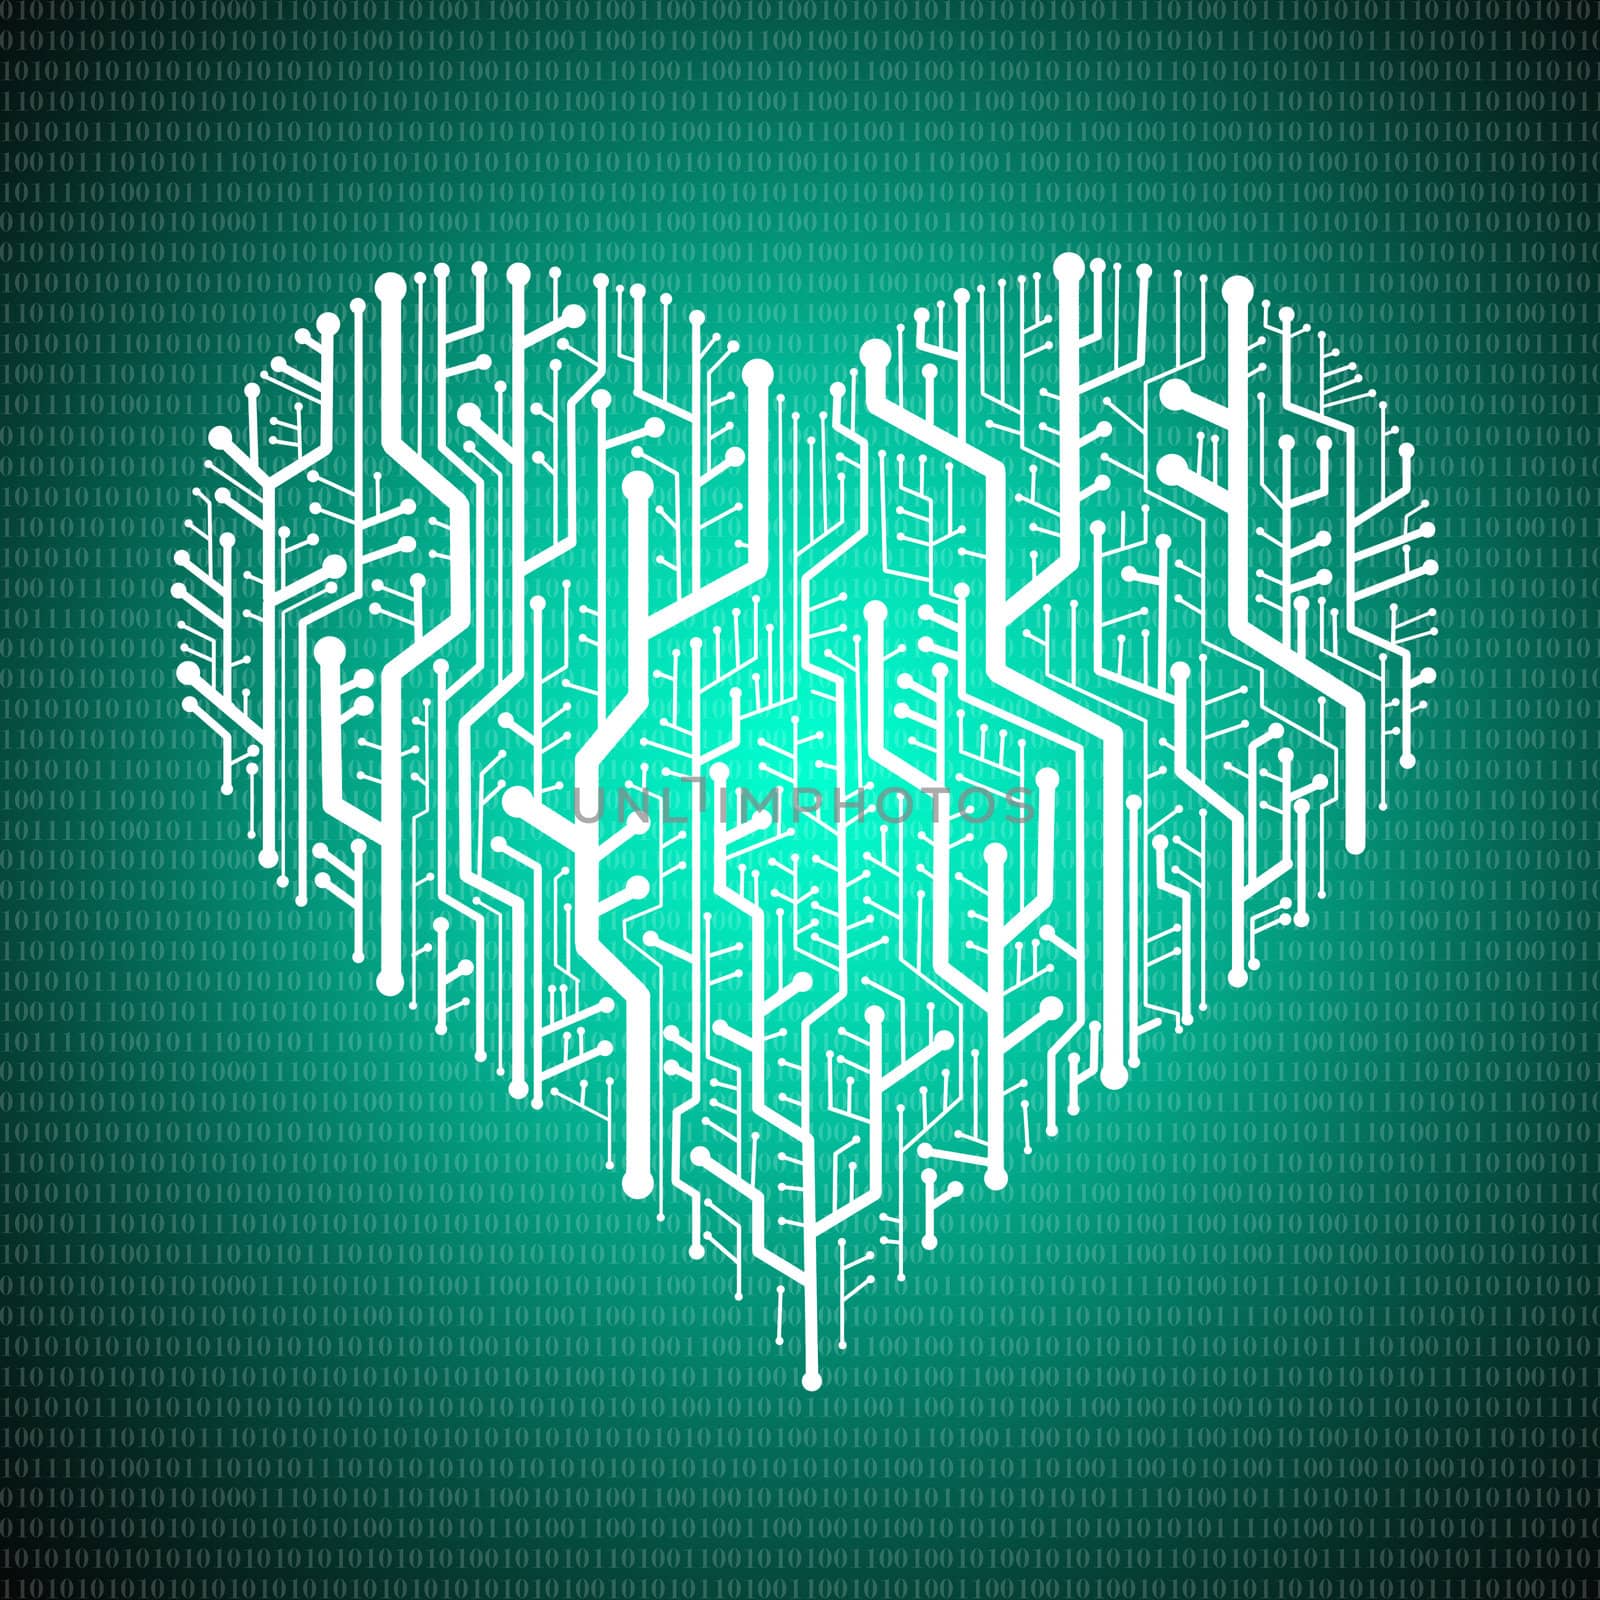 Circuit board in Heart shape with digit background by pixbox77